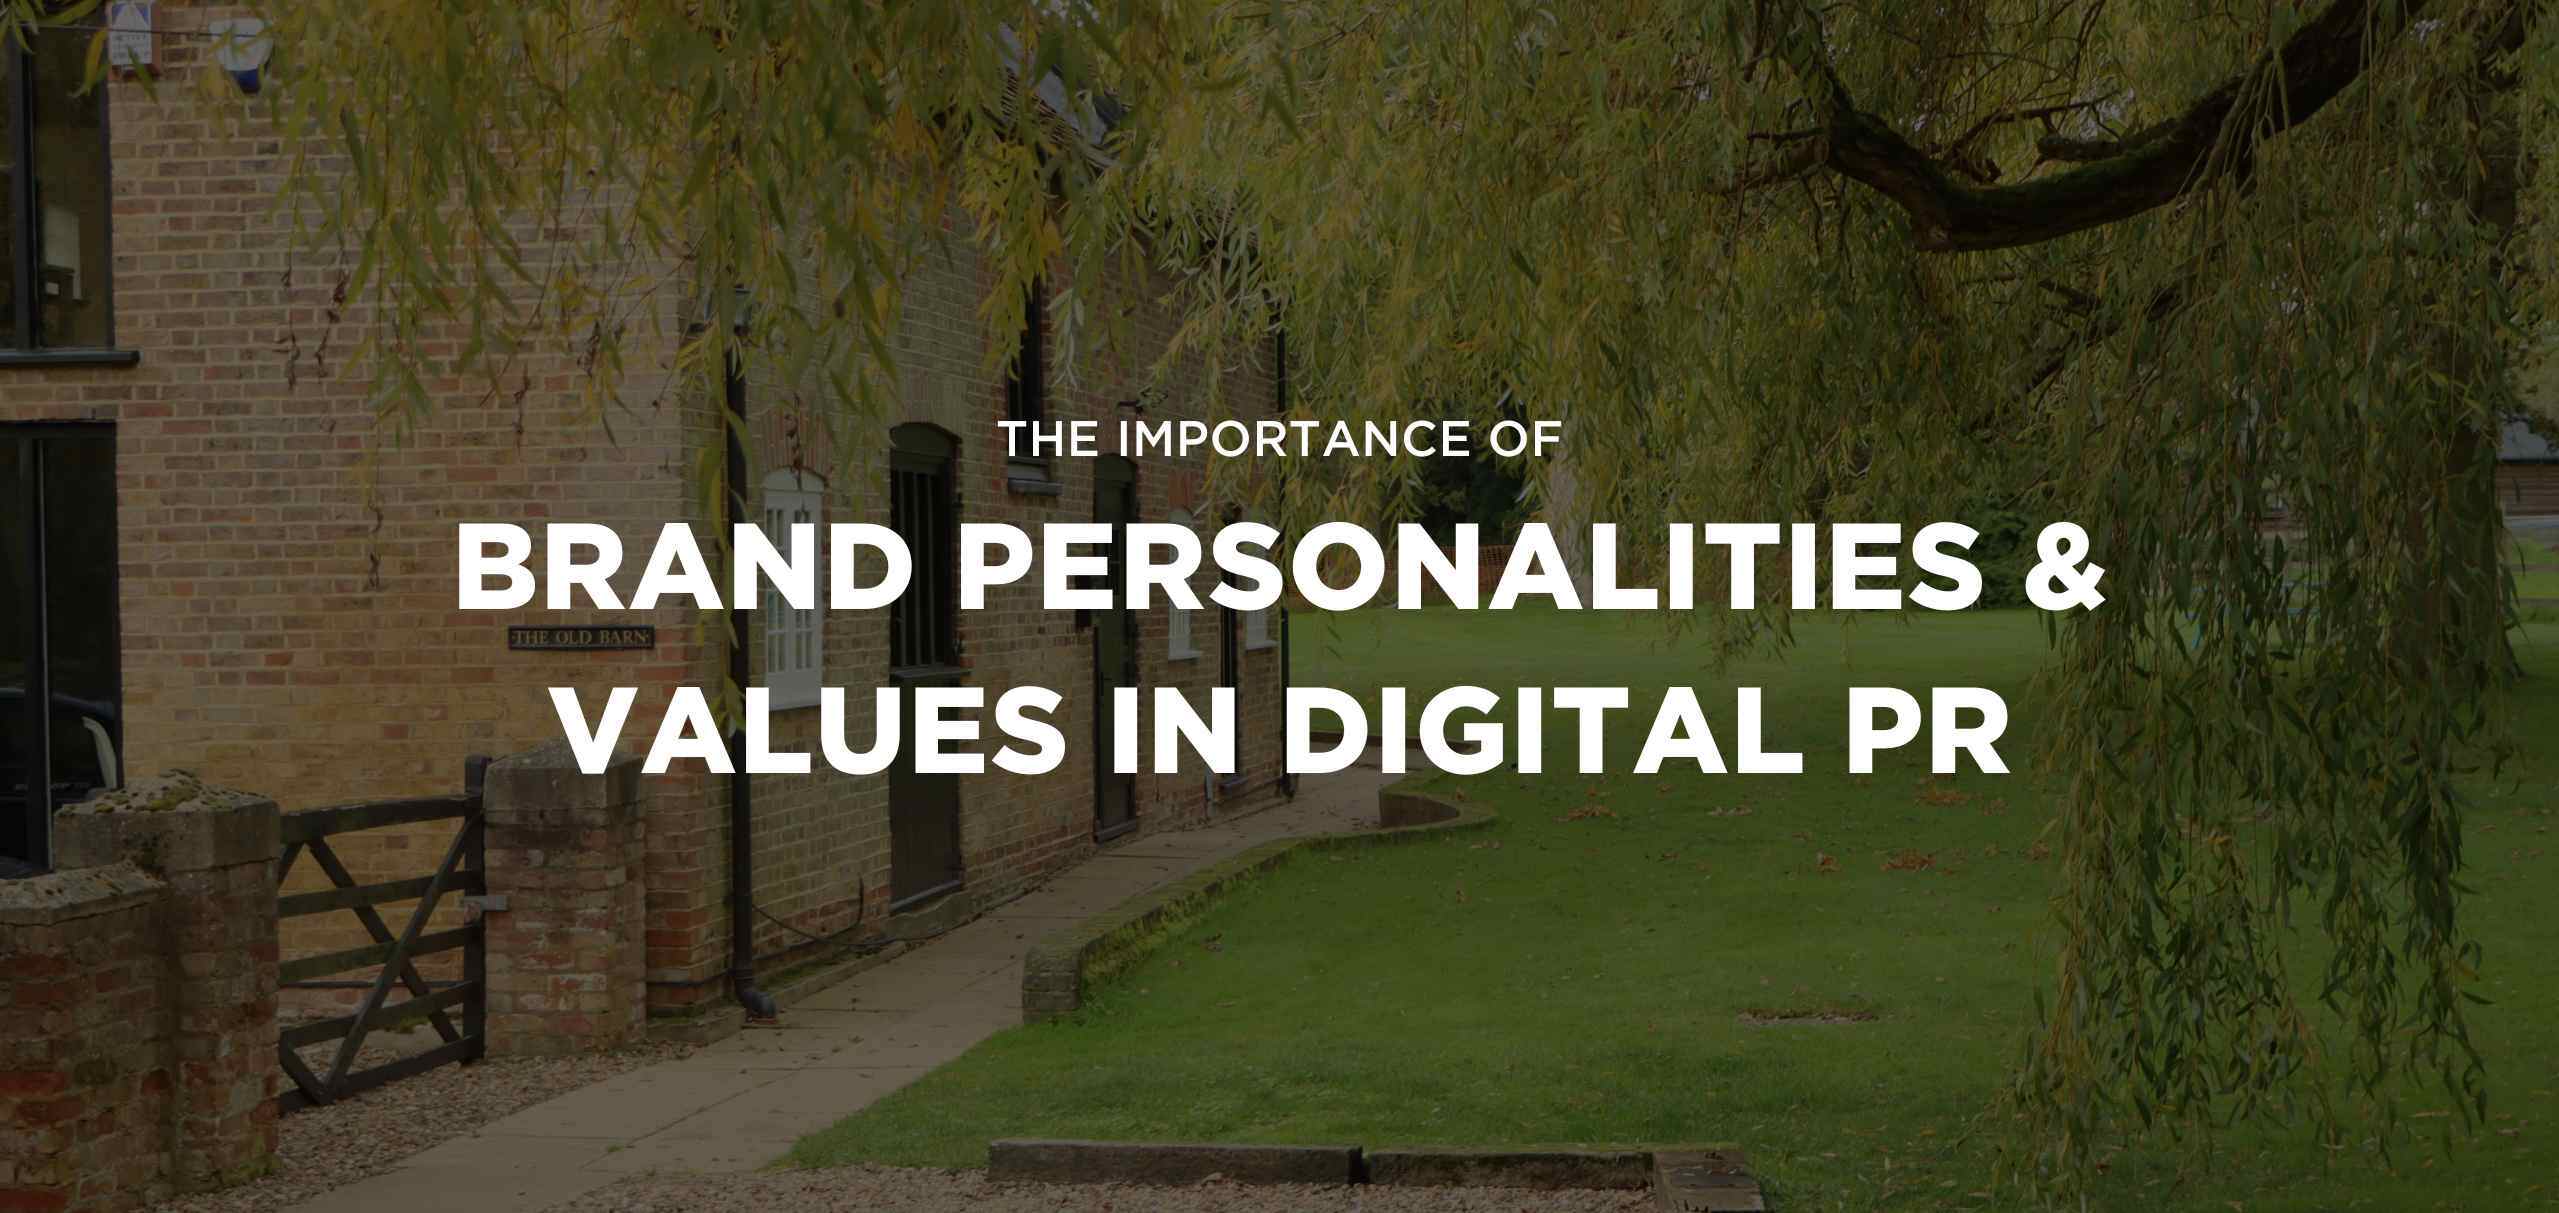 Importance of brand personalities and values in Digital PR